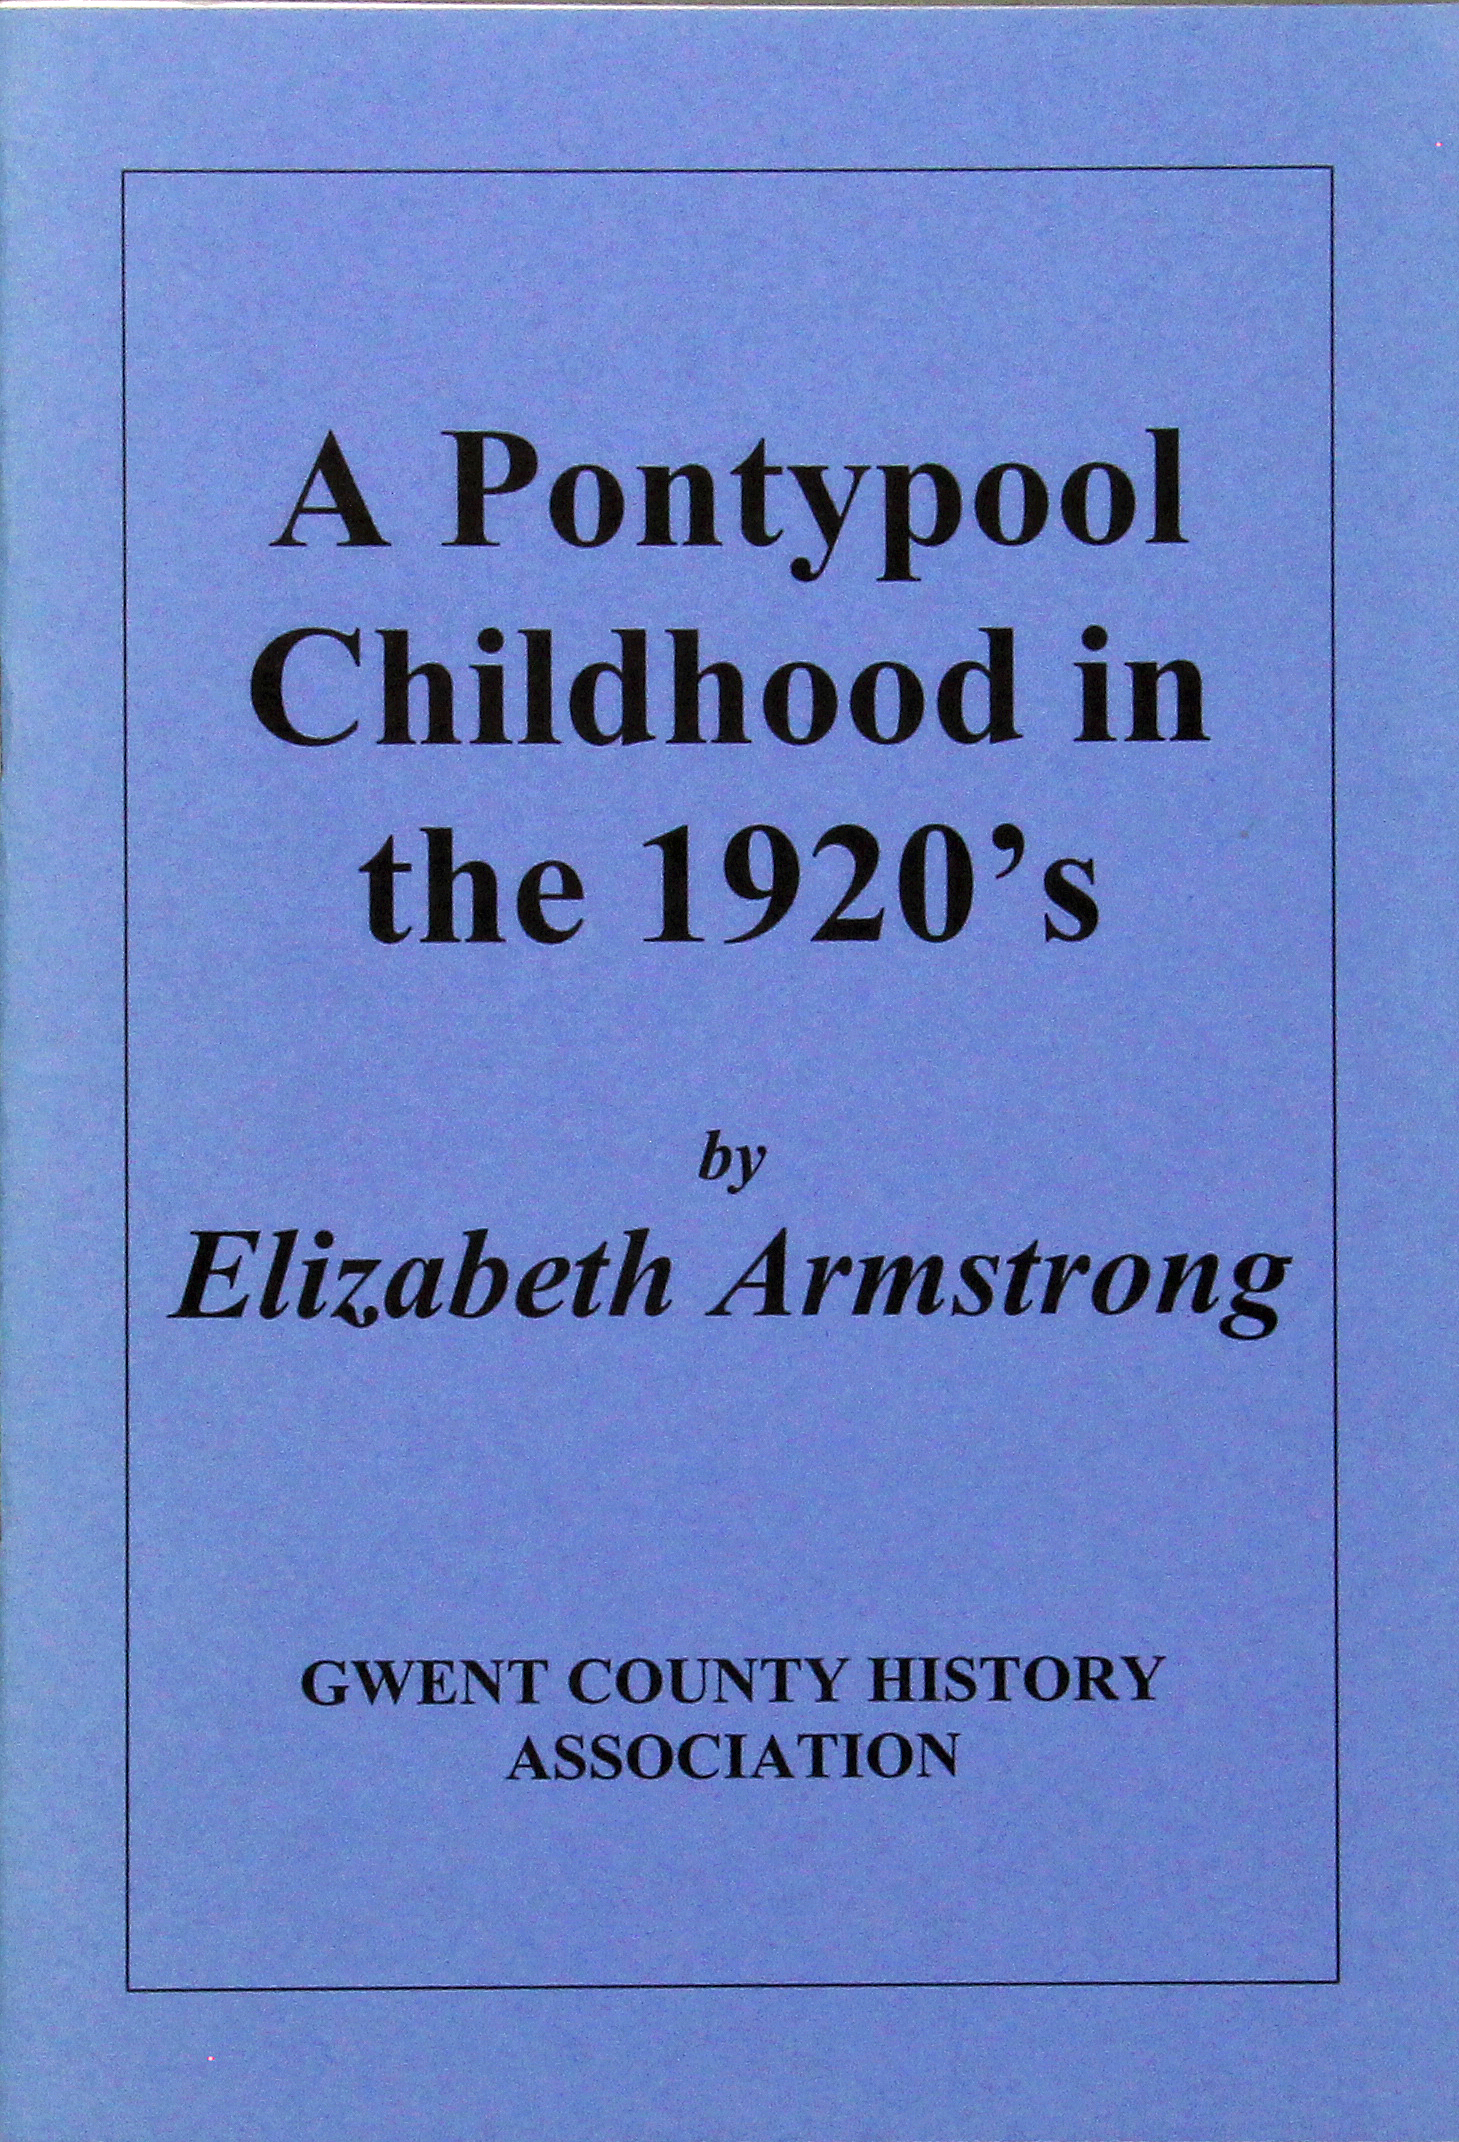 A Pontypool Childhood in the 1920s